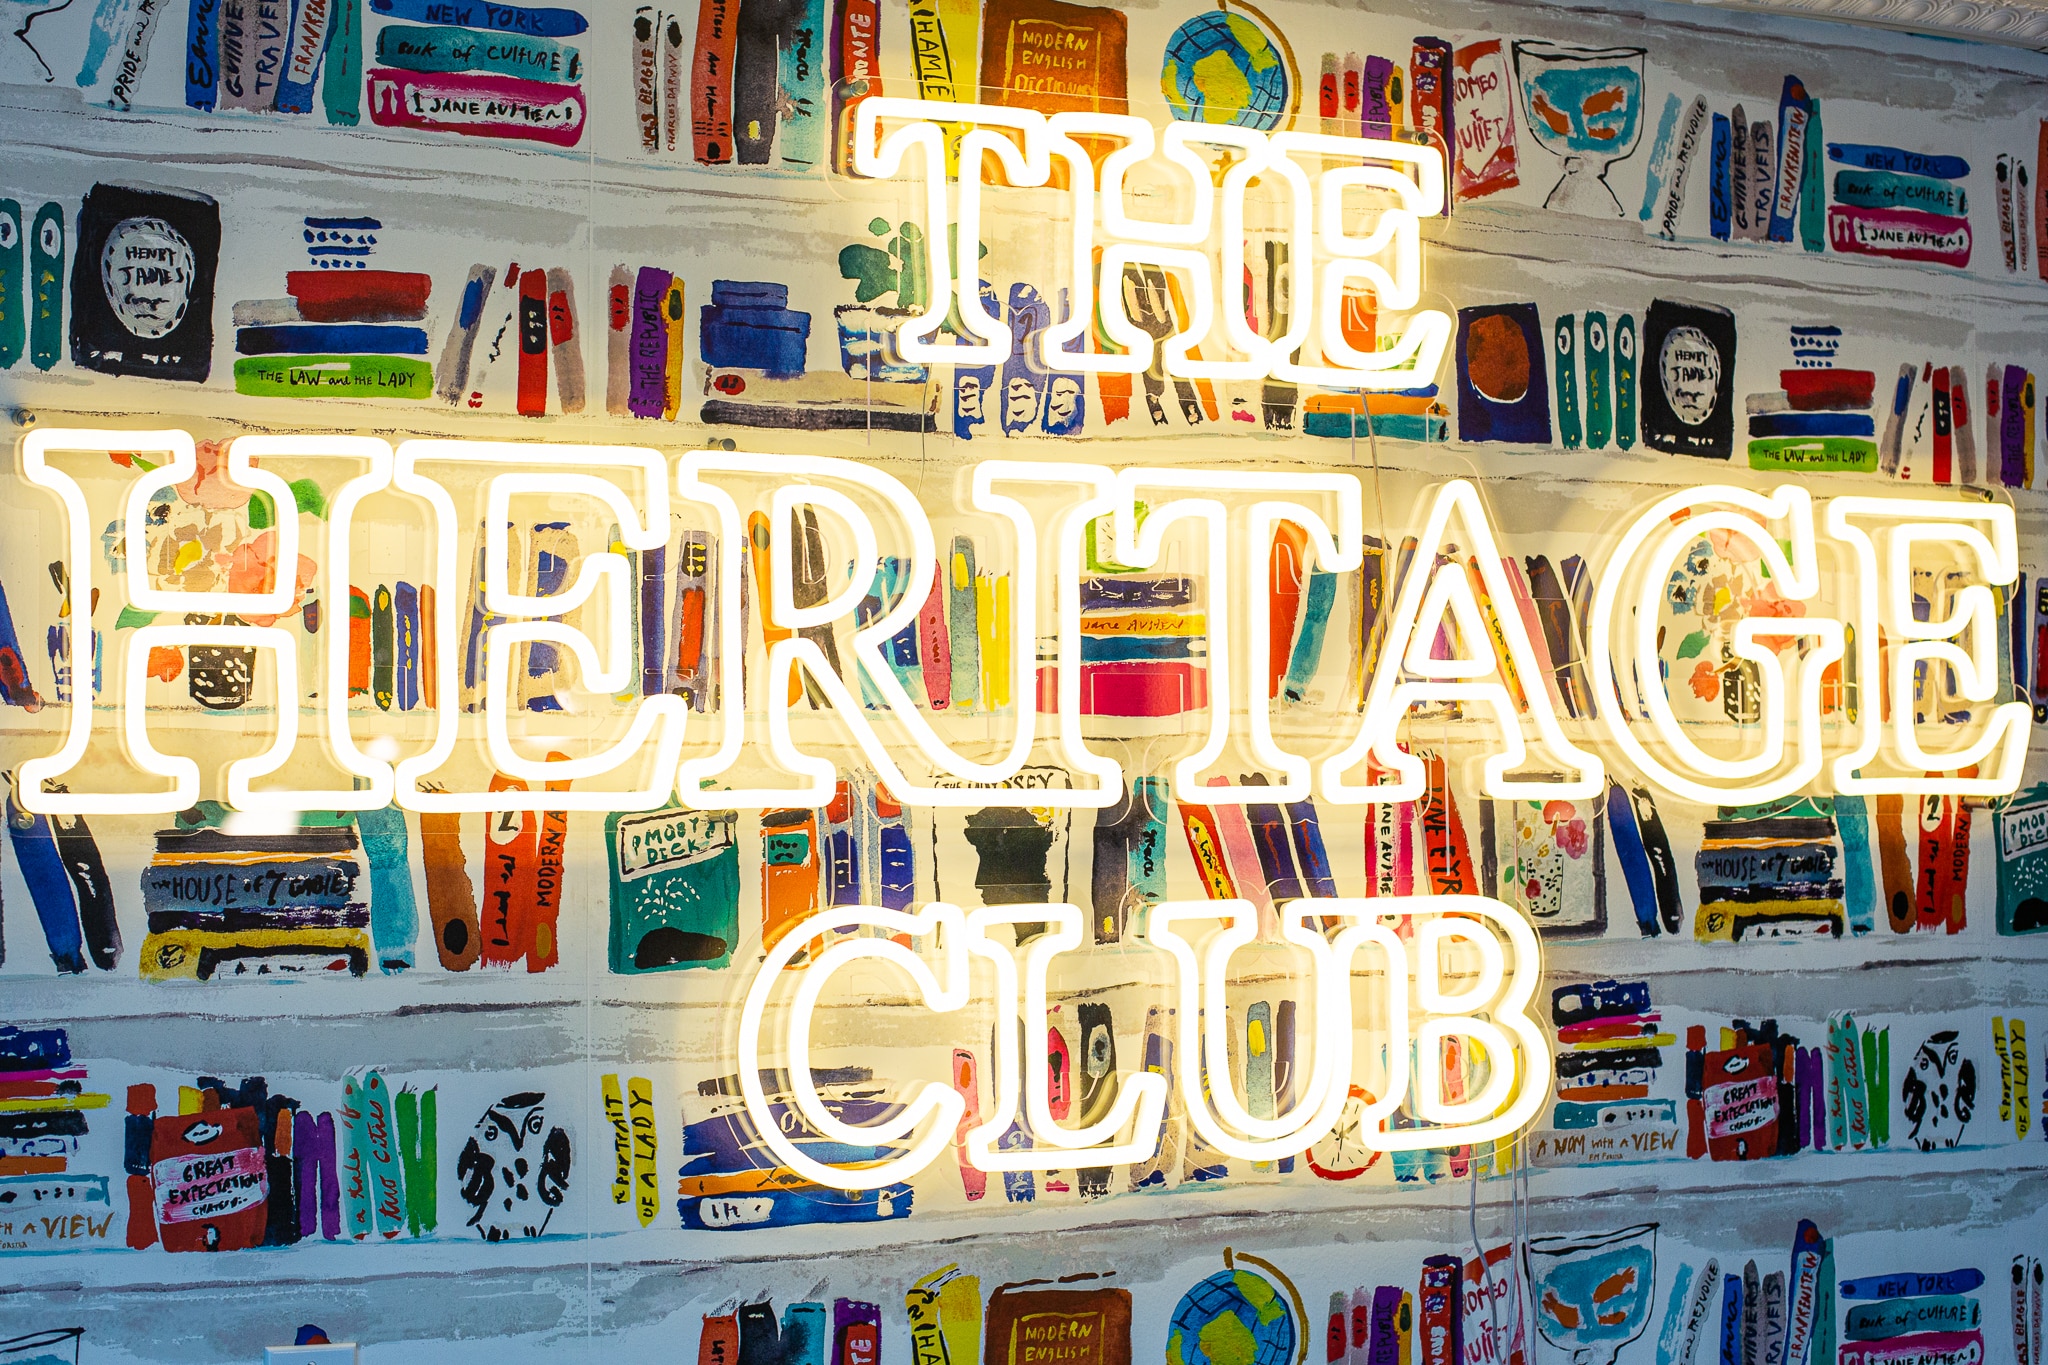 The Heritage Club Light Up Sign